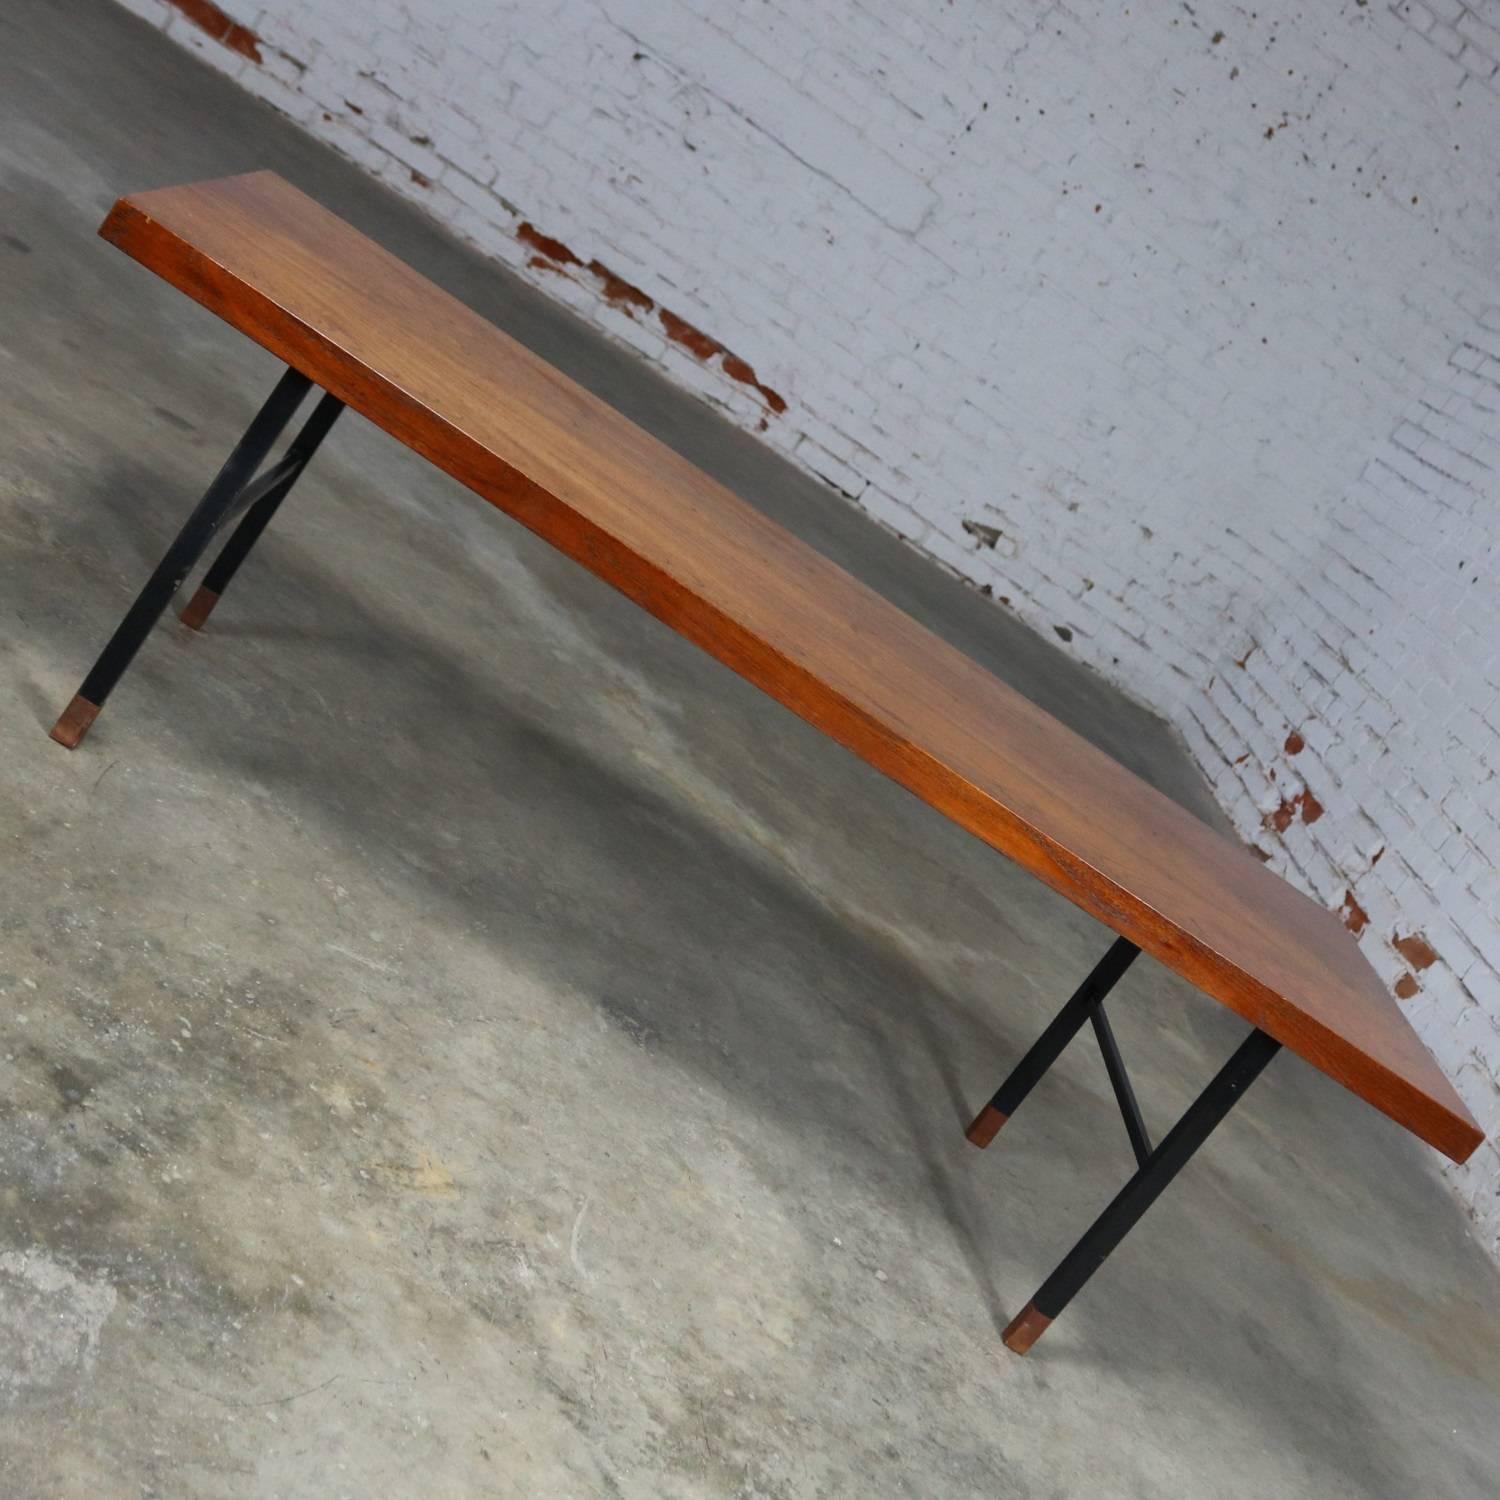 Handsome midcentury Scandinavian Modern coffee table with teak top and black painted metal H-base and teak feet. Stamped Made in Denmark on underside. In wonderful vintage condition apart from a small portion of a water spot we have been unable to